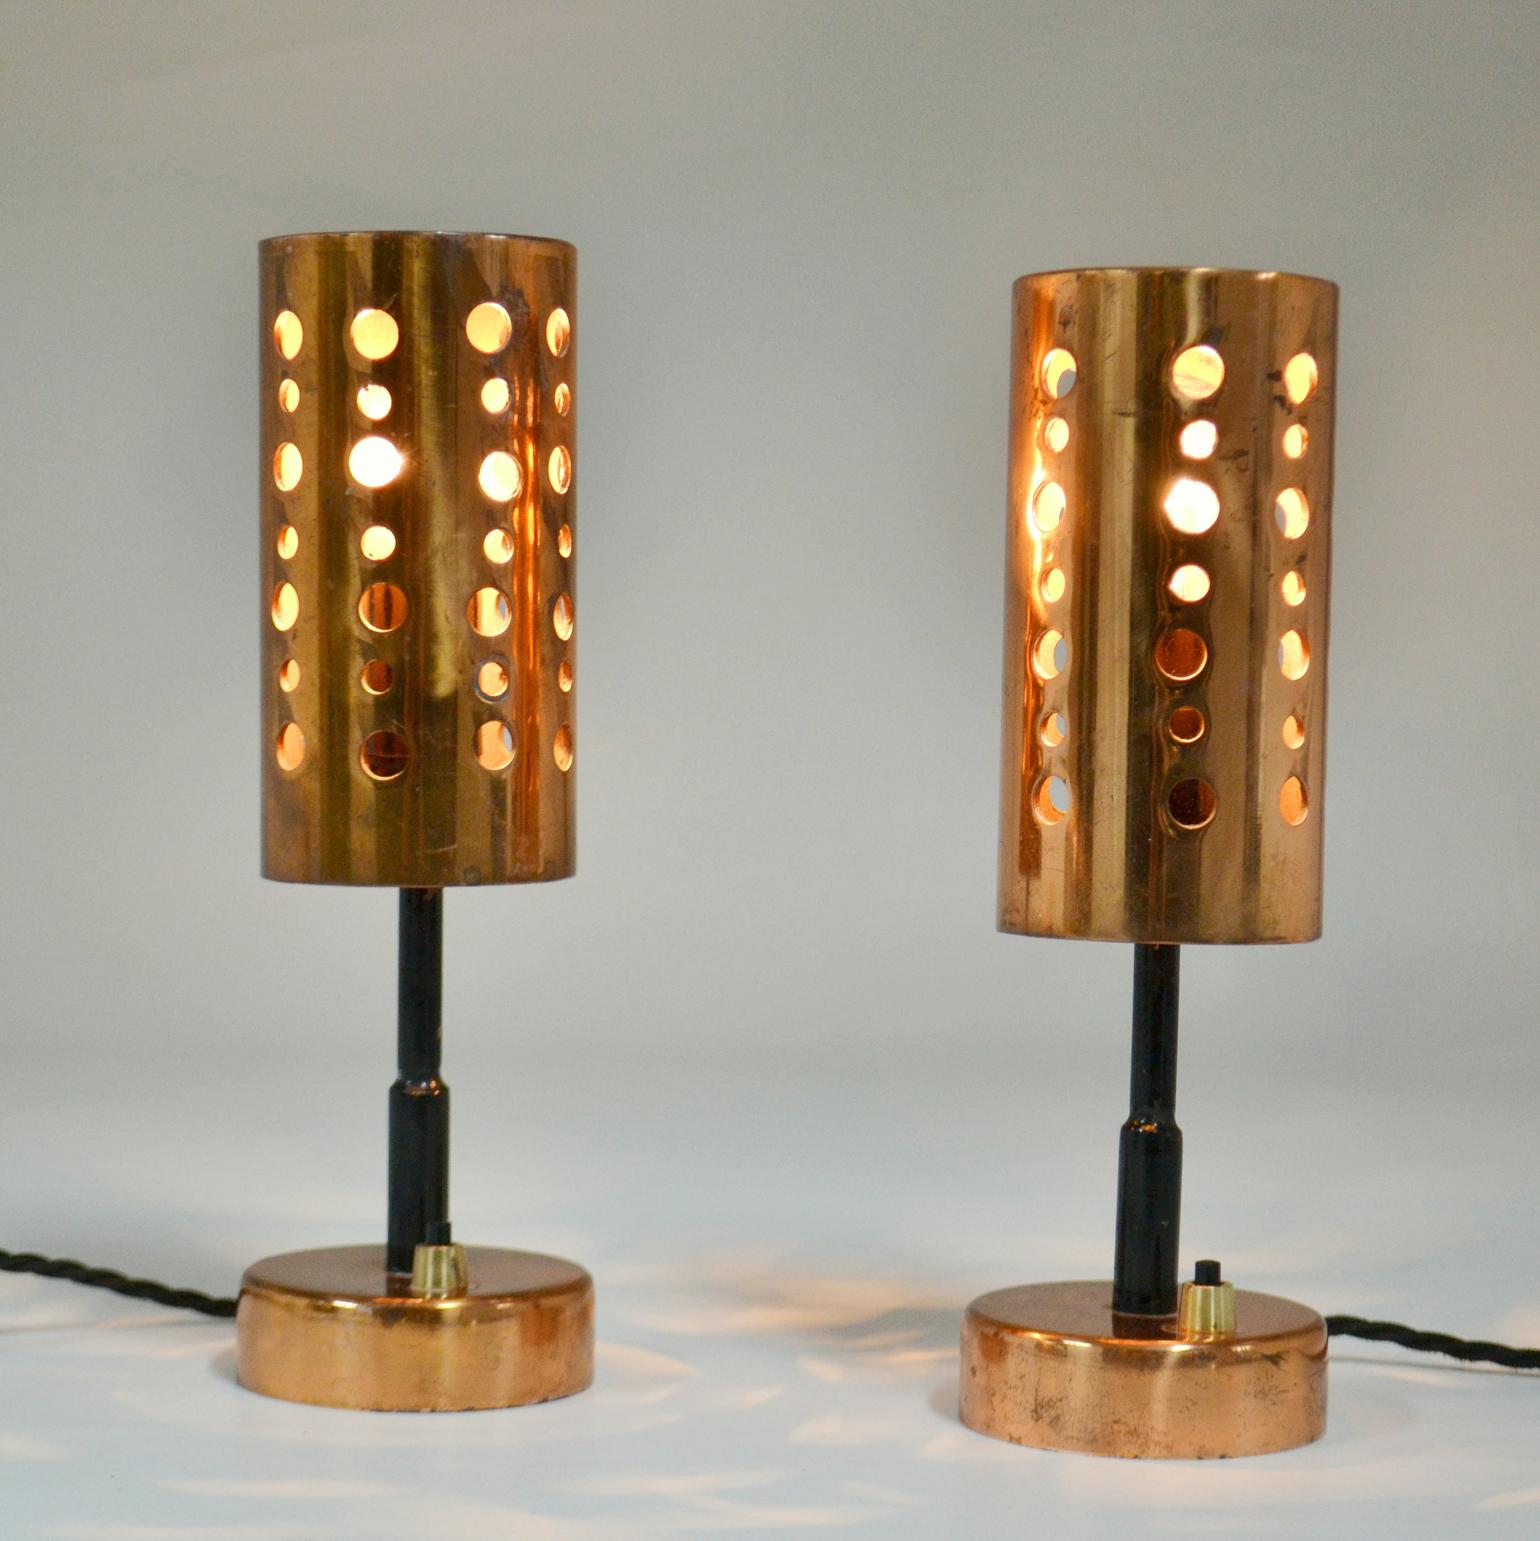 Small Mid-Century Modern copper table lamps have cylinder shape perforated shade on a black metal stem and copper feet.
Priced and sold as a set.